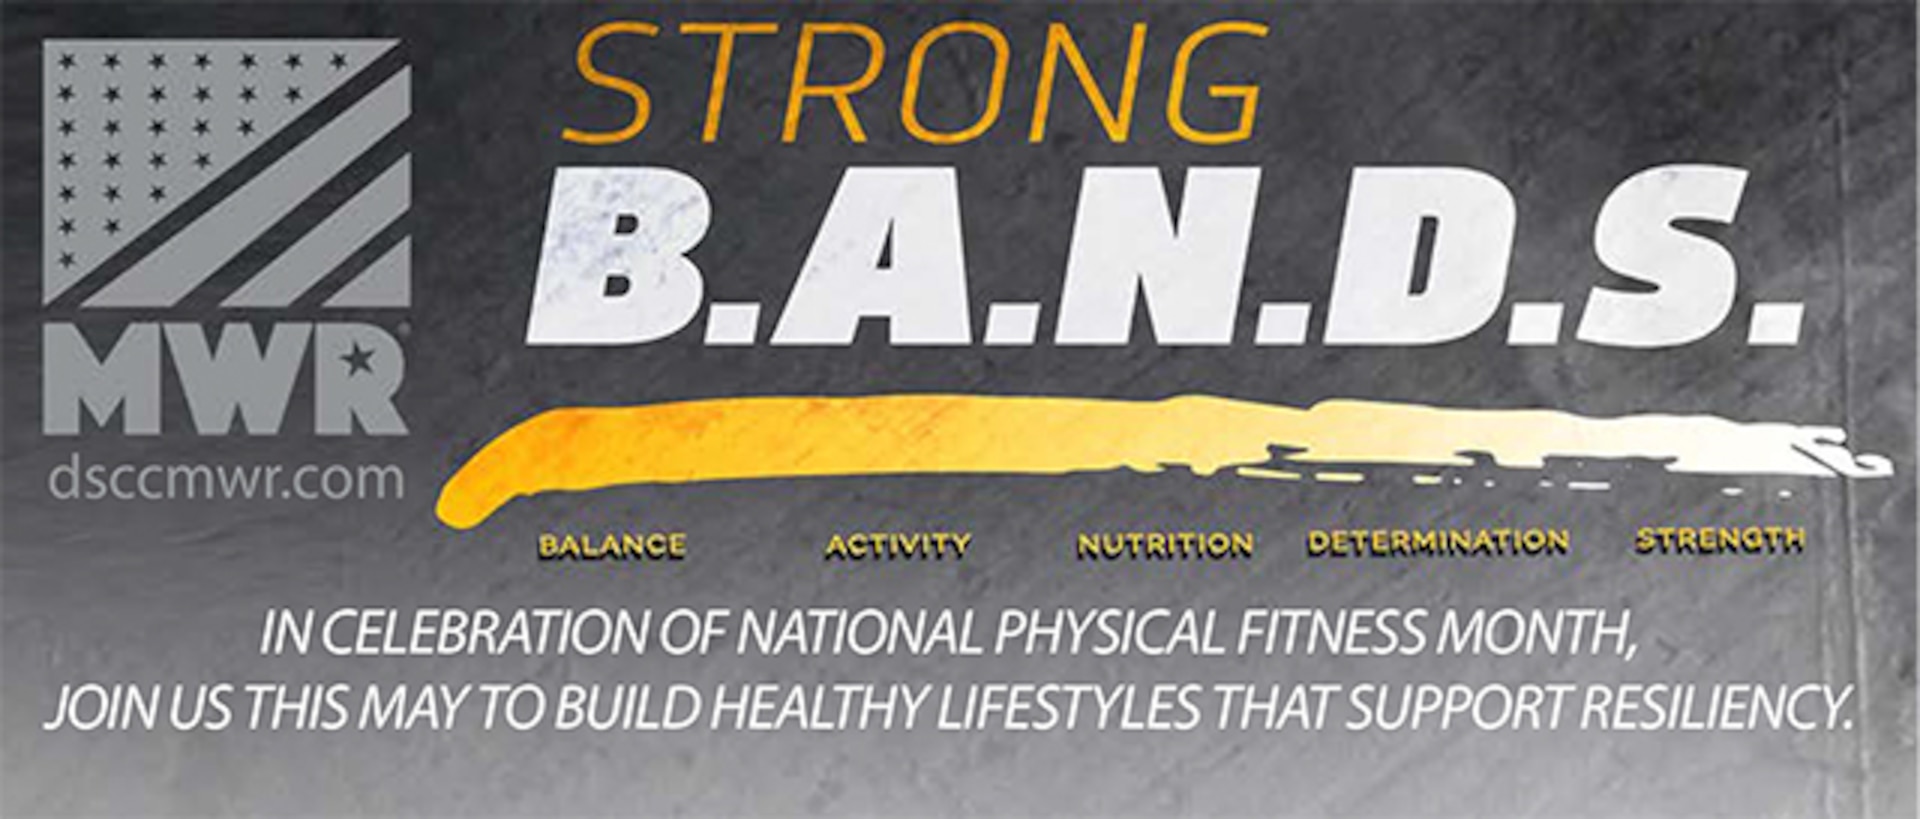 DSCC MWR will use the Strong B.A.N.D.S. campaign to promote fitness, wellness and resiliency during National Physical Fitness and Sports Month in May. DSCC MWR is offering five events to DSCC Associates, Military and families focused on Balance, Activity, Nutrition, Determination and Strength (B.A.N.D.S.) -- all key components of overall well-being and resiliency.